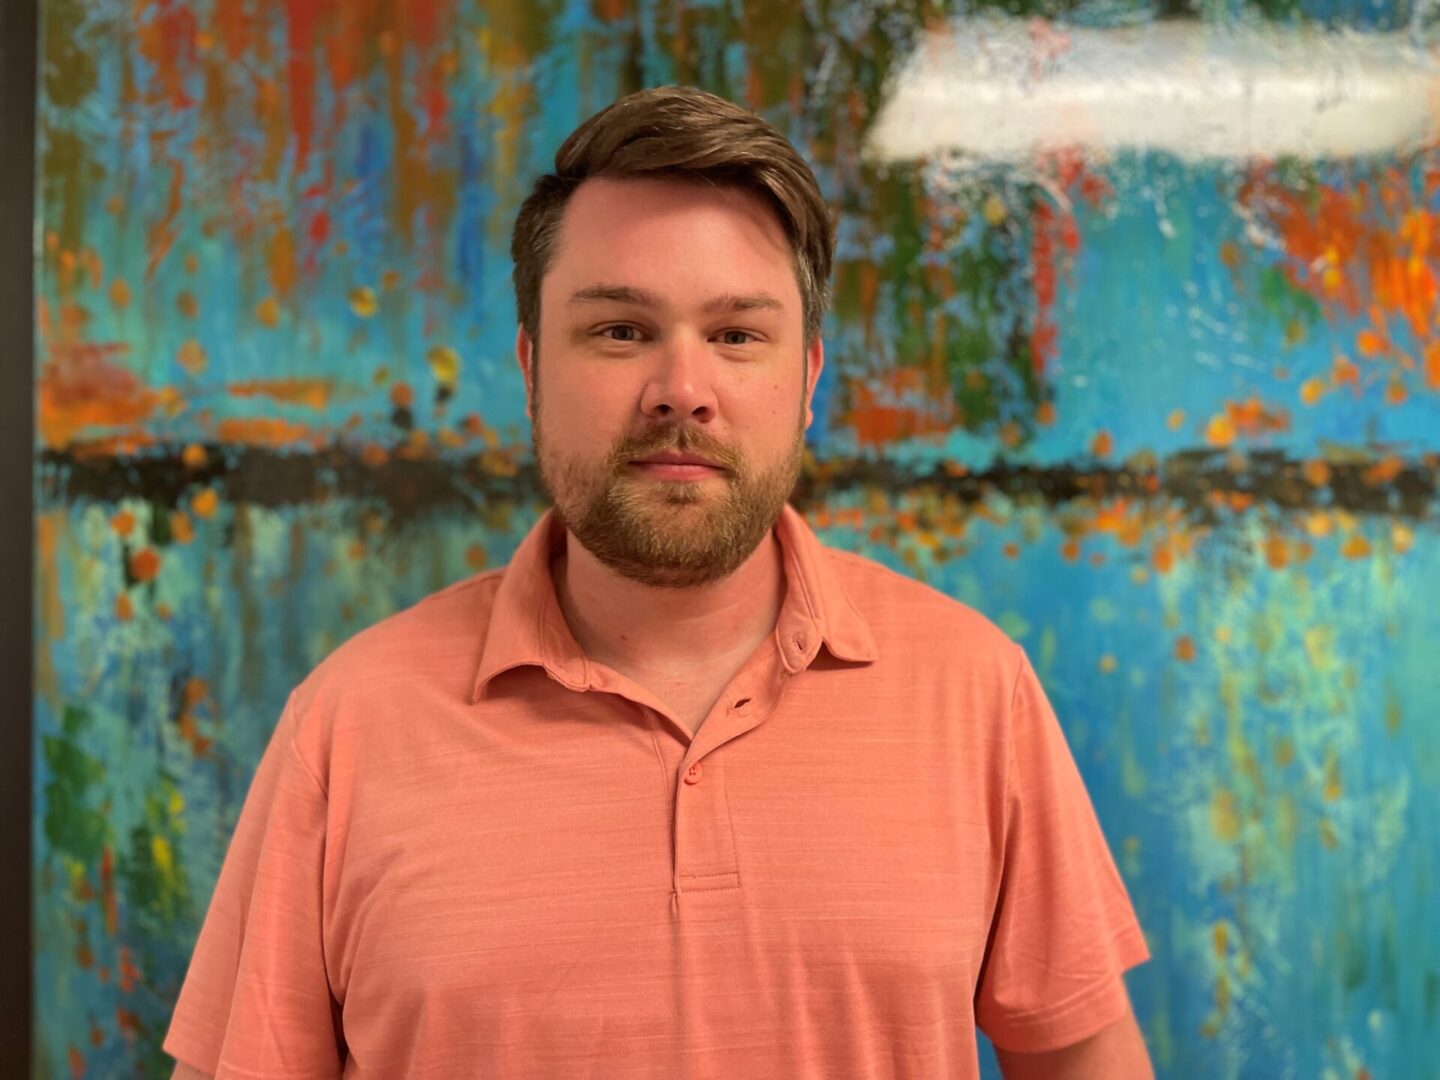 Travis Baker stands in front of a blue and orange painting